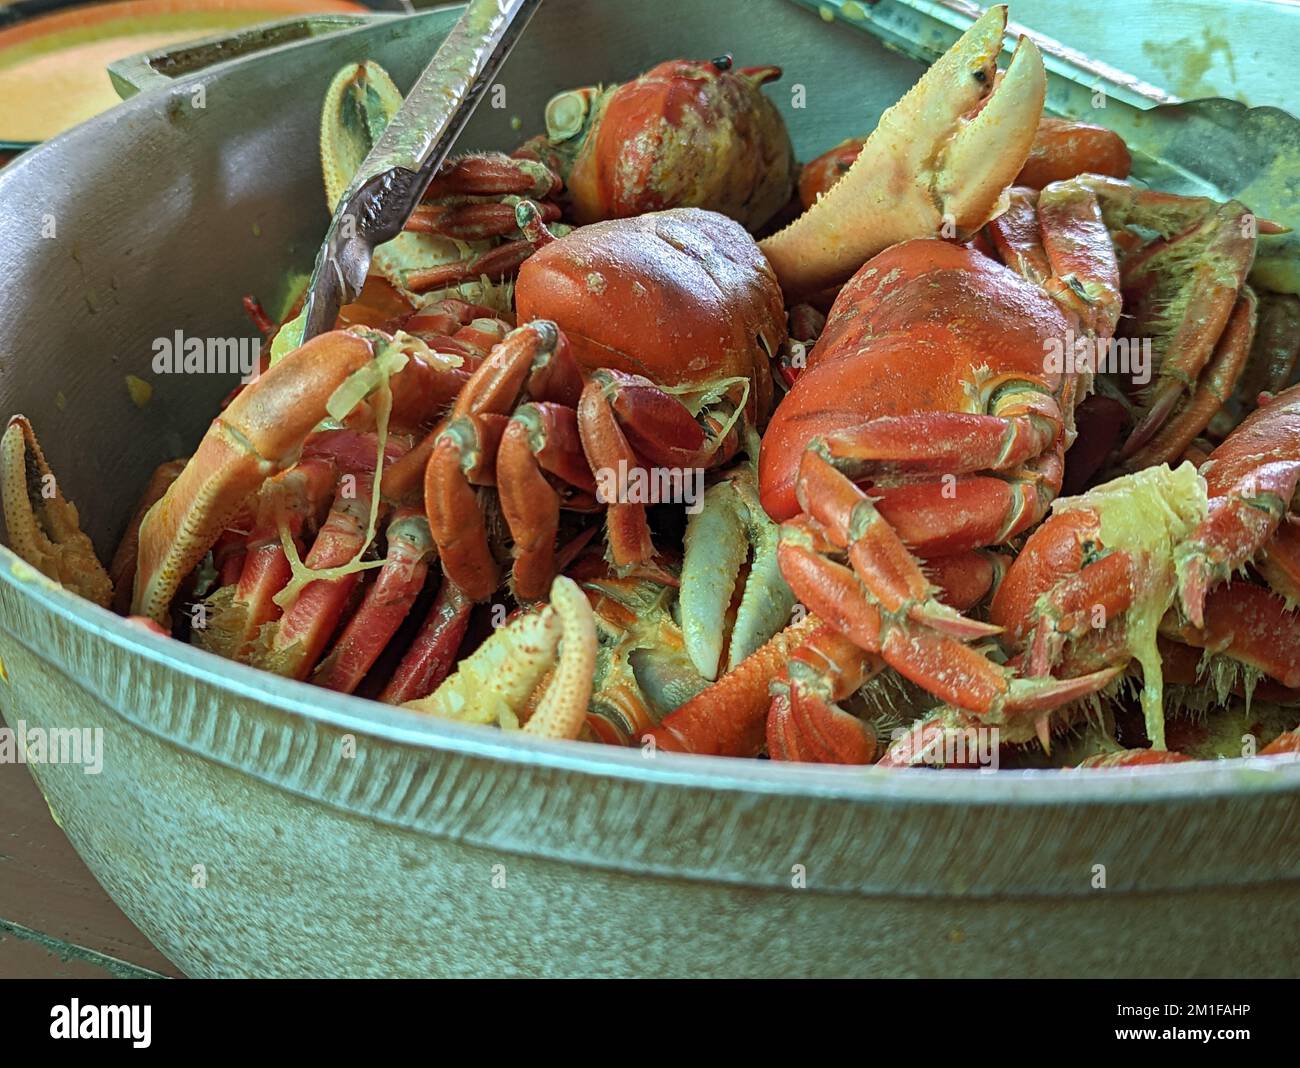 typical dish in ecuador of boiled crab Stock Photo